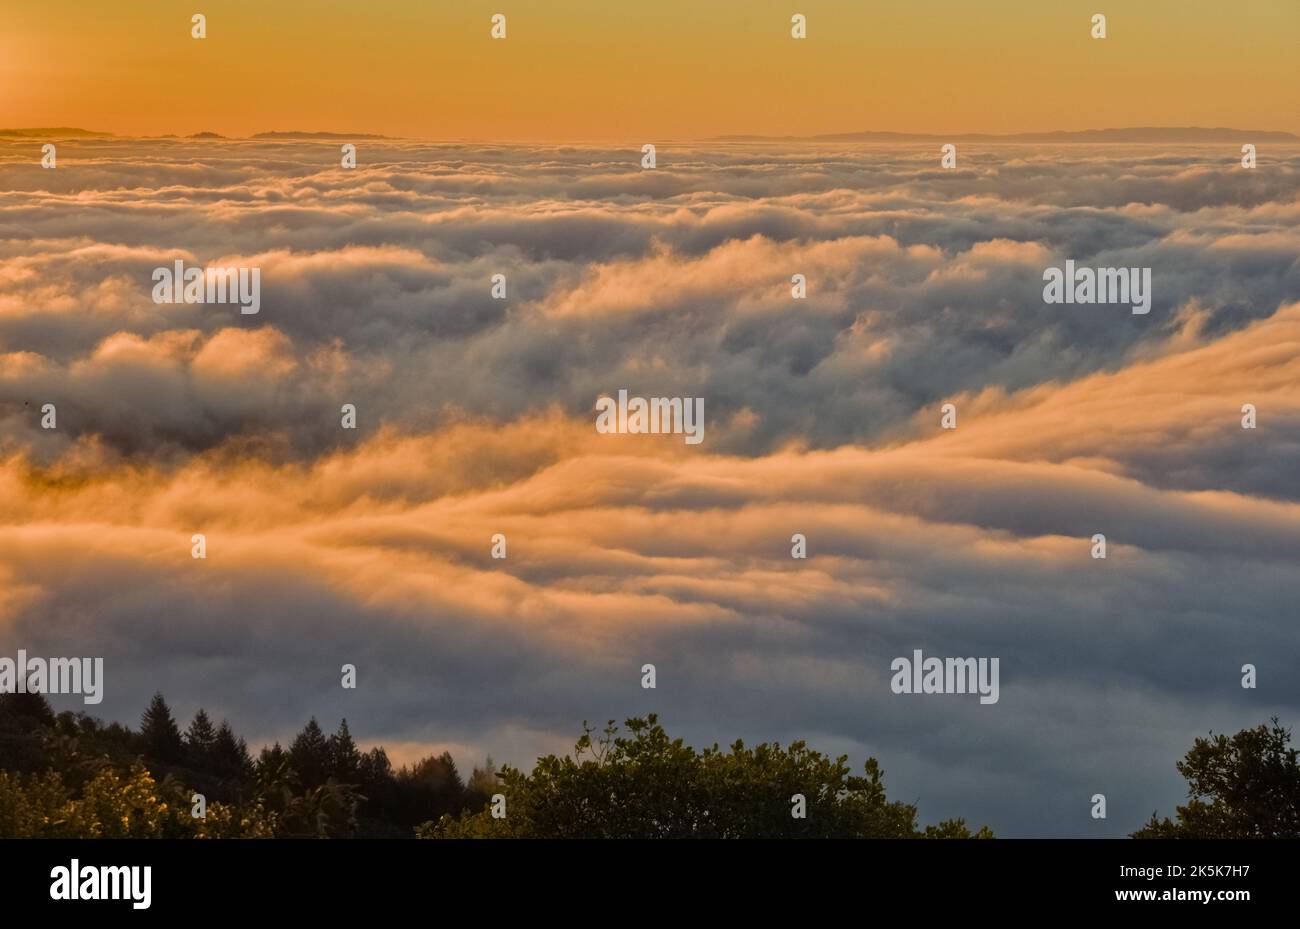 sea of clouds in the sunrise with tree top at the bottom edge. Stock Photo